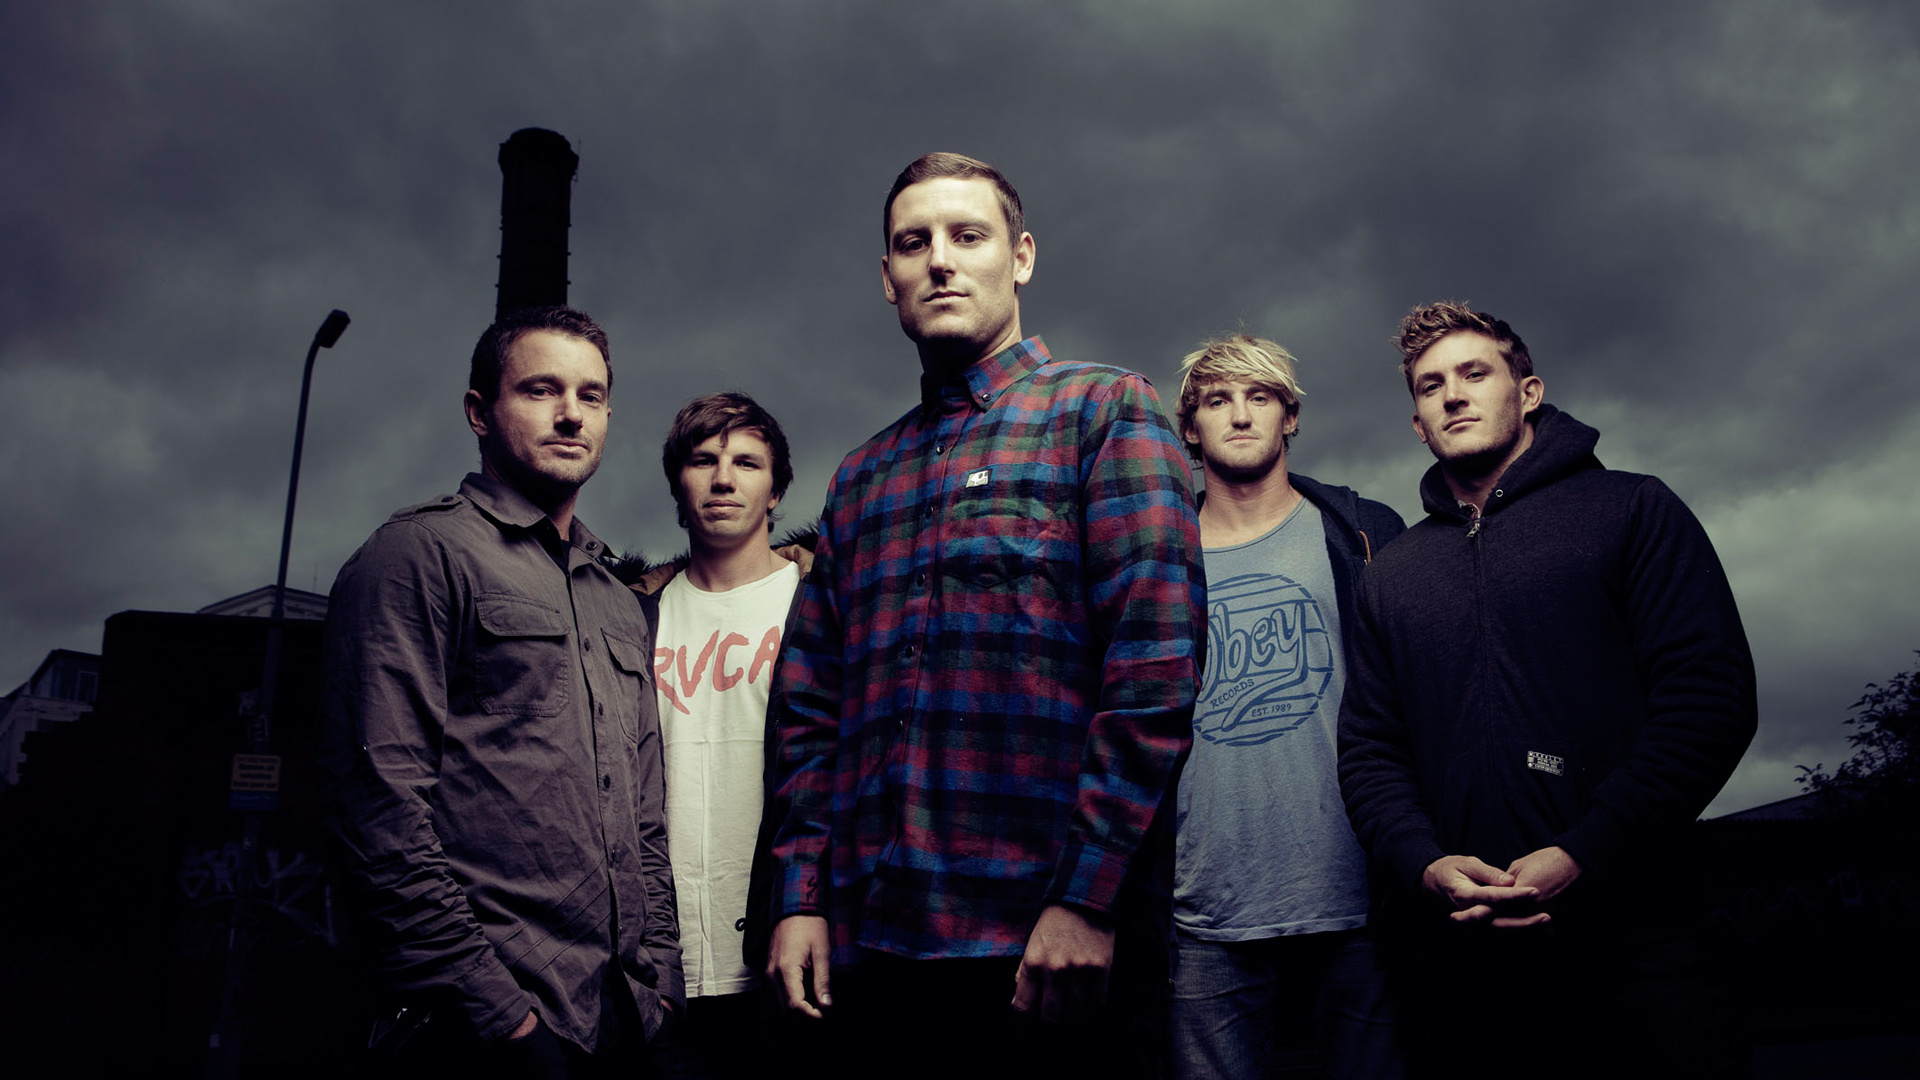 Parkway Drive, Music wallpapers, HQ pictures, 2019 4K images, 1920x1080 Full HD Desktop